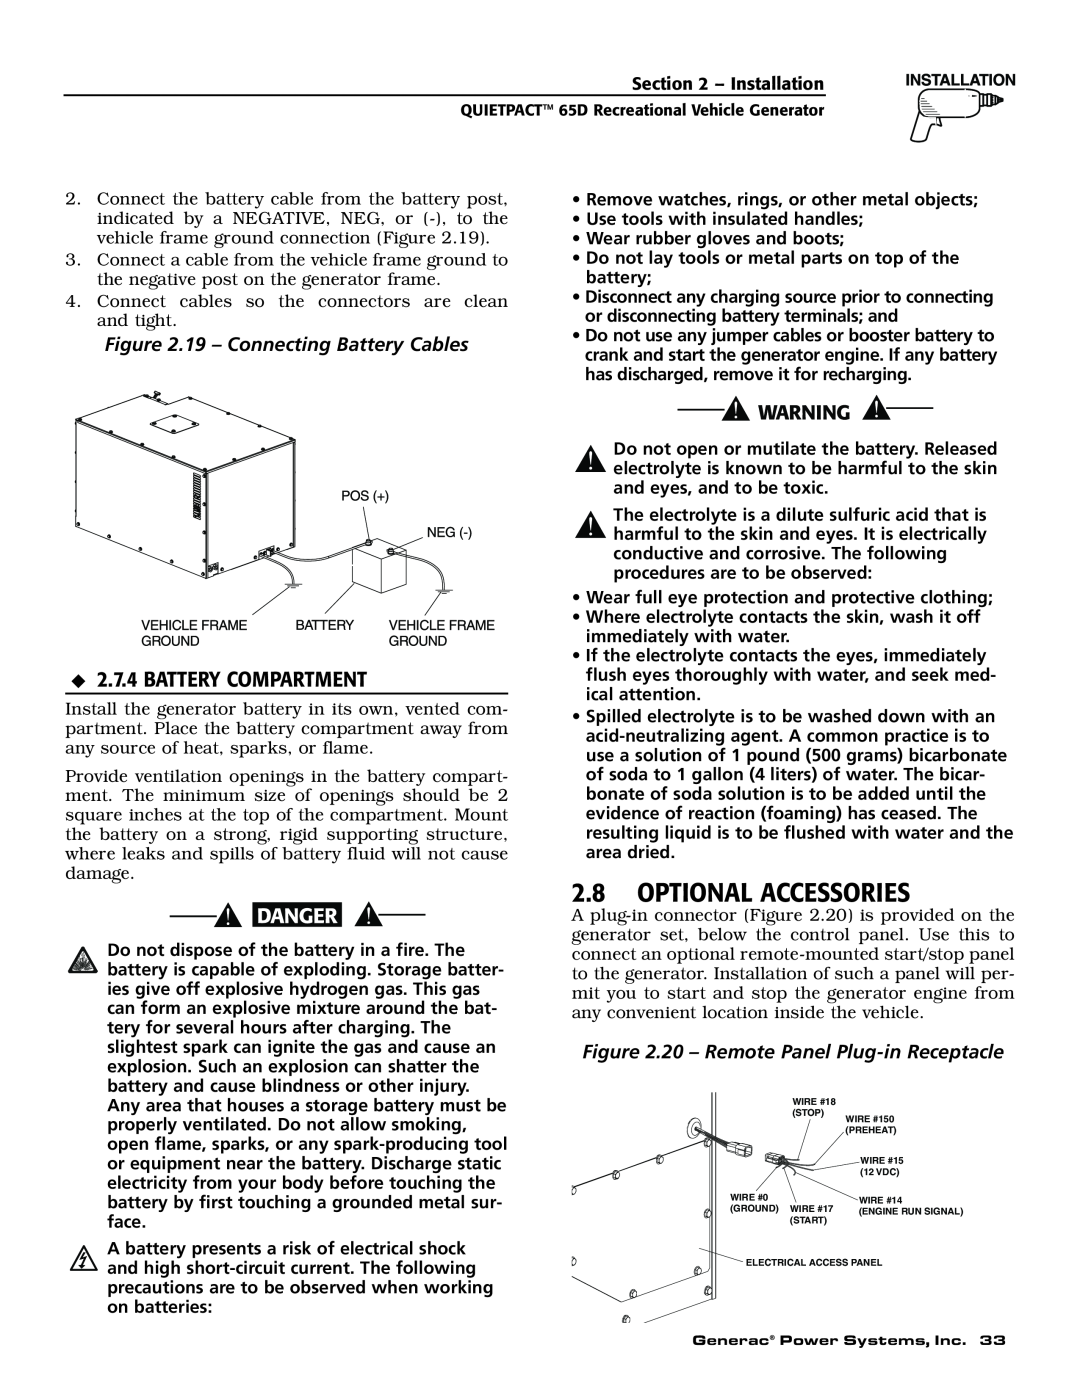 Generac 004614-1 owner manual Optional Accessories, Battery Compartment, 19 - Connecting Battery Cables 